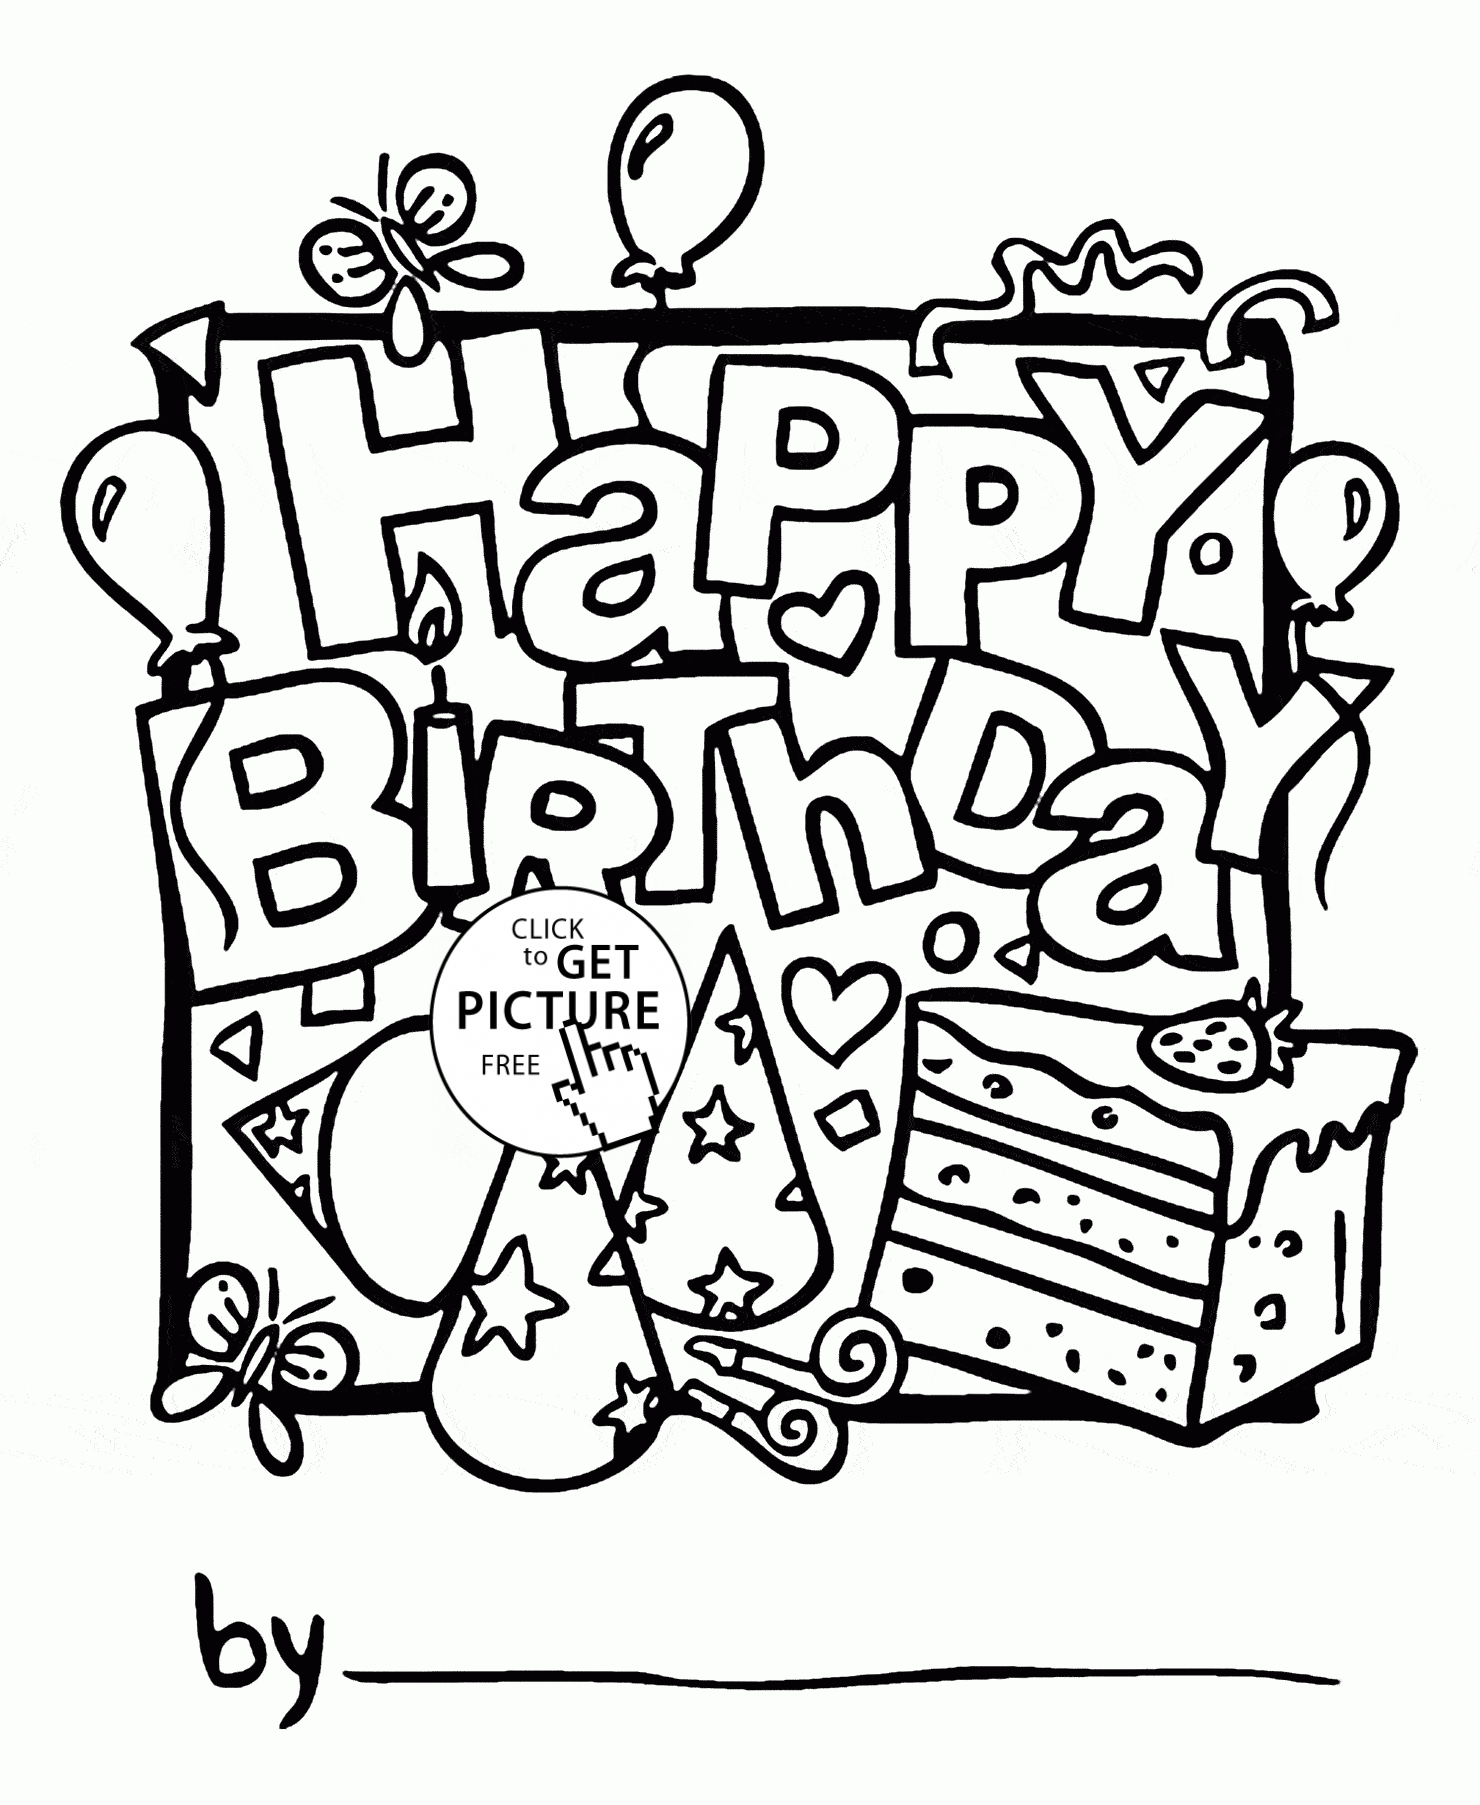 Free Coloring Pages Birthday Card For Boy, Download Free Coloring Pages